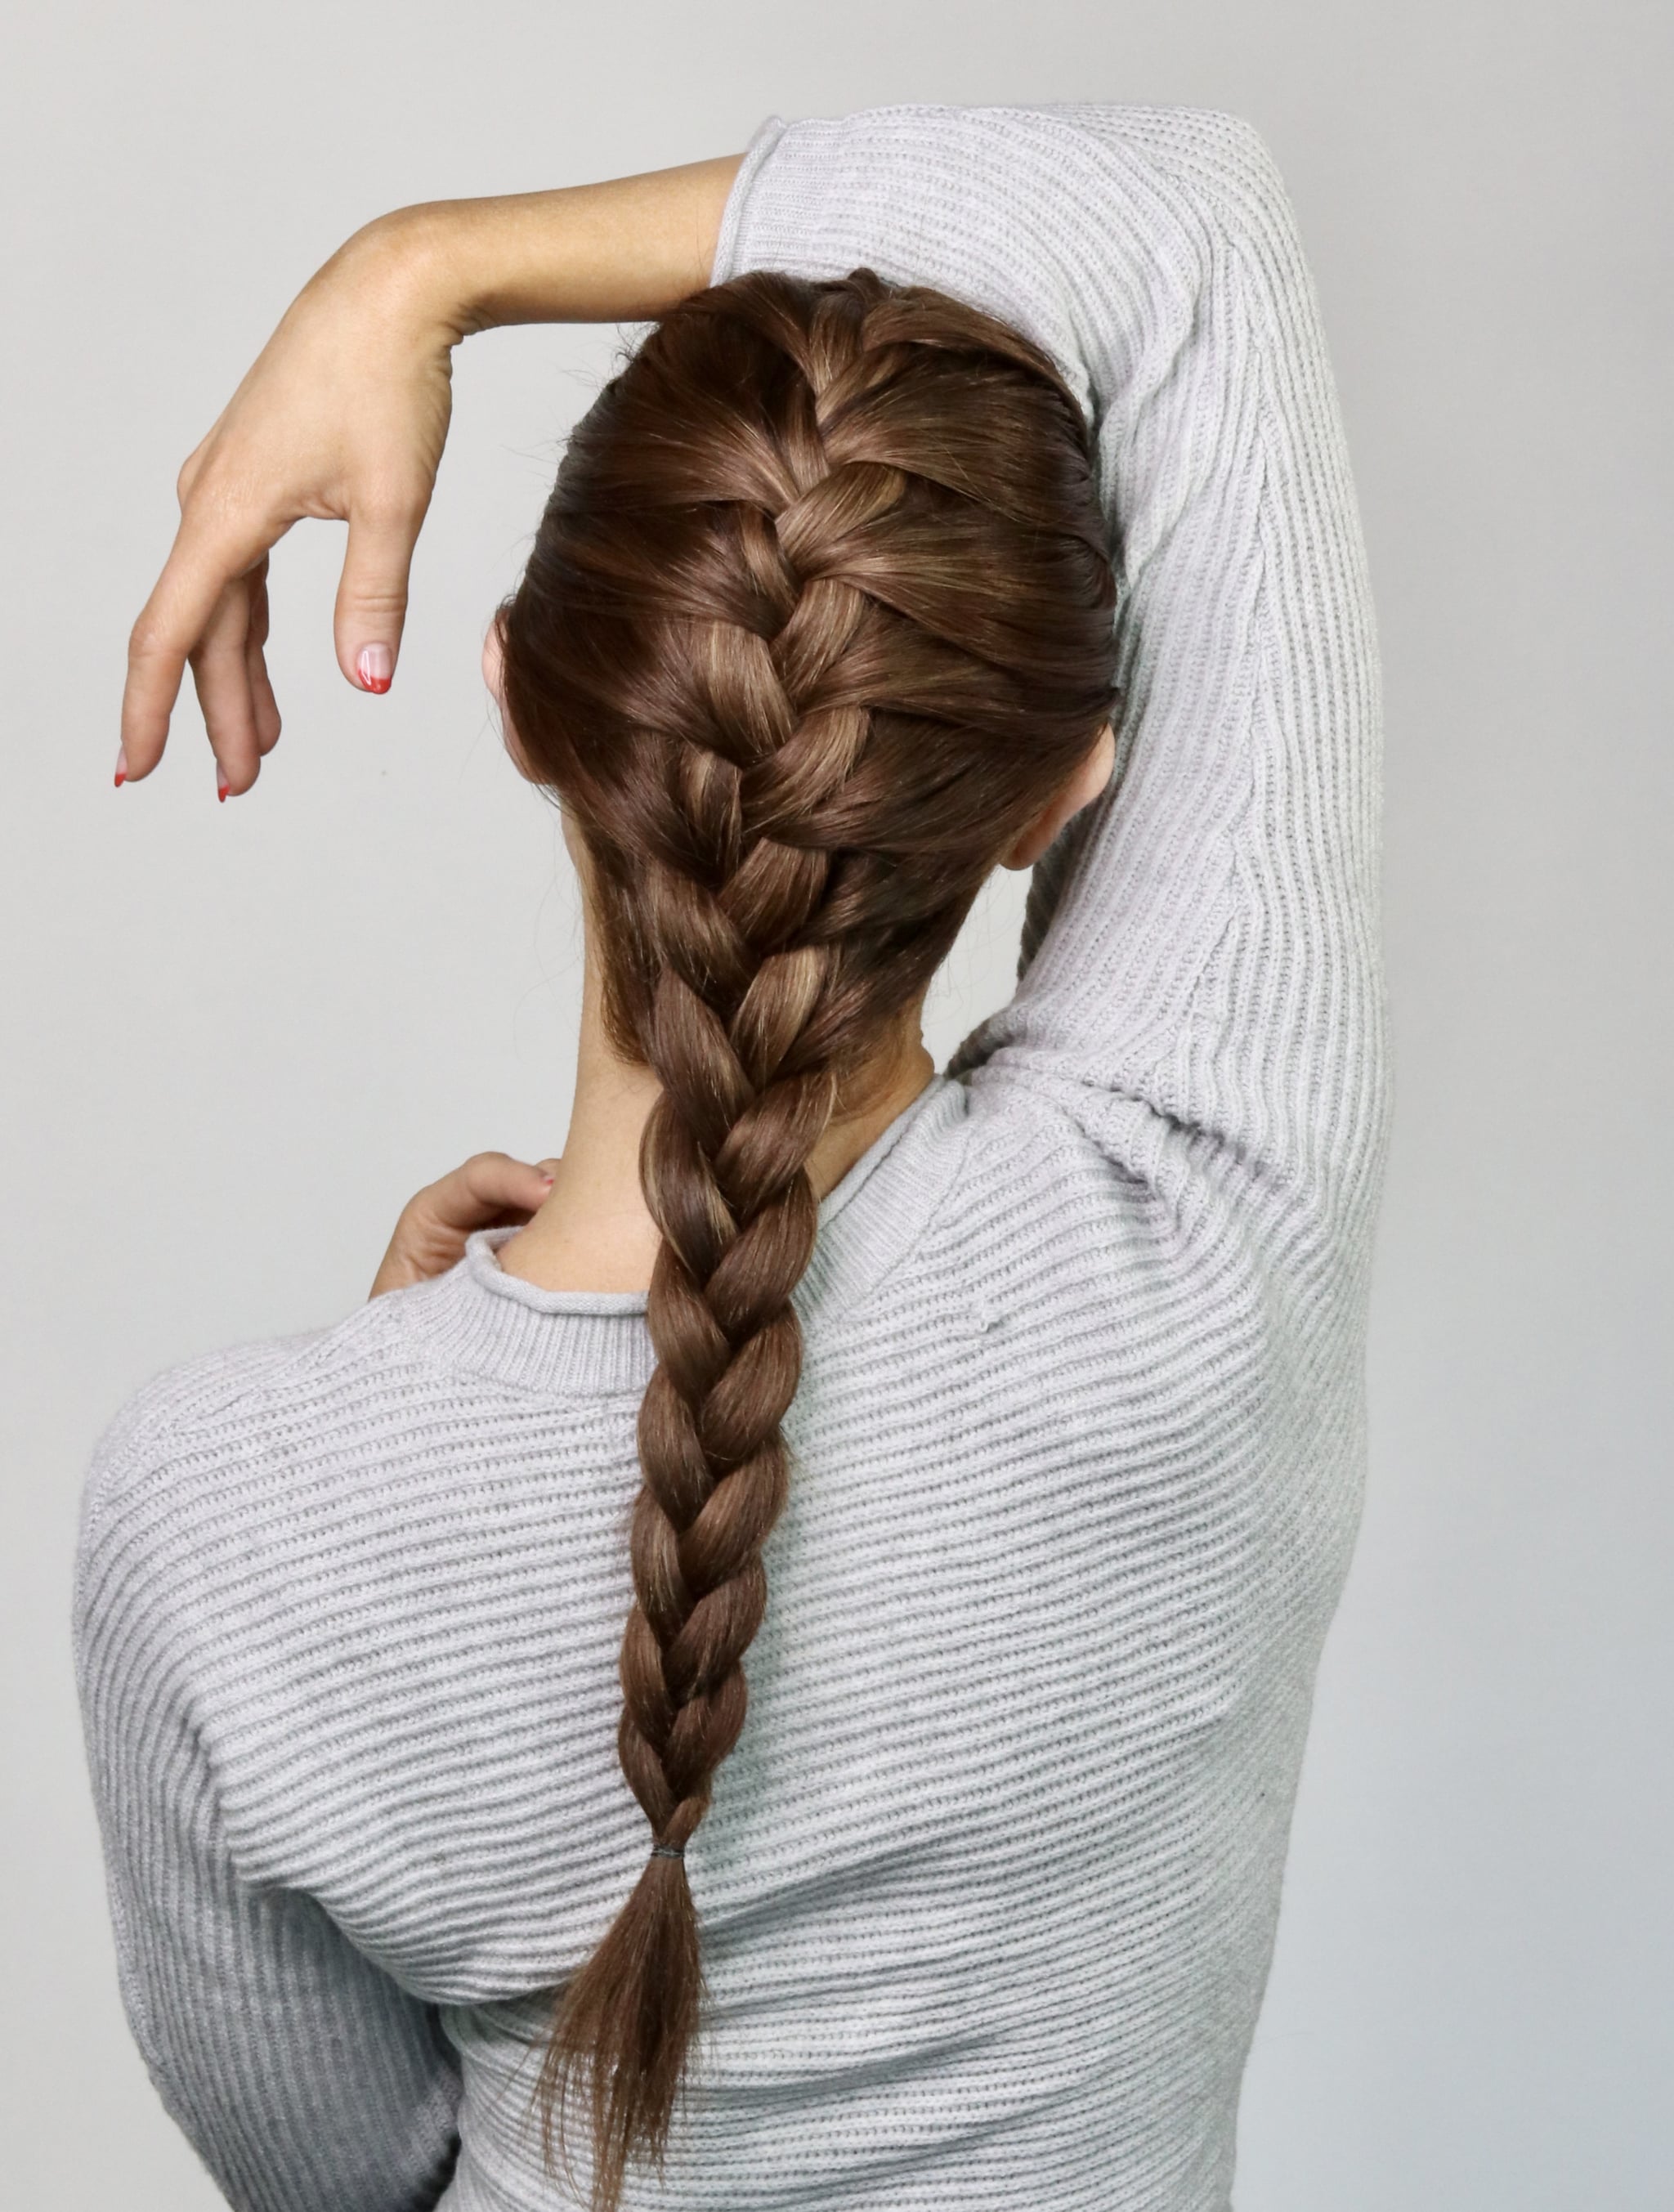 How to French Braid Your Hair: Step-by-Step Tutorial | POPSUGAR Beauty